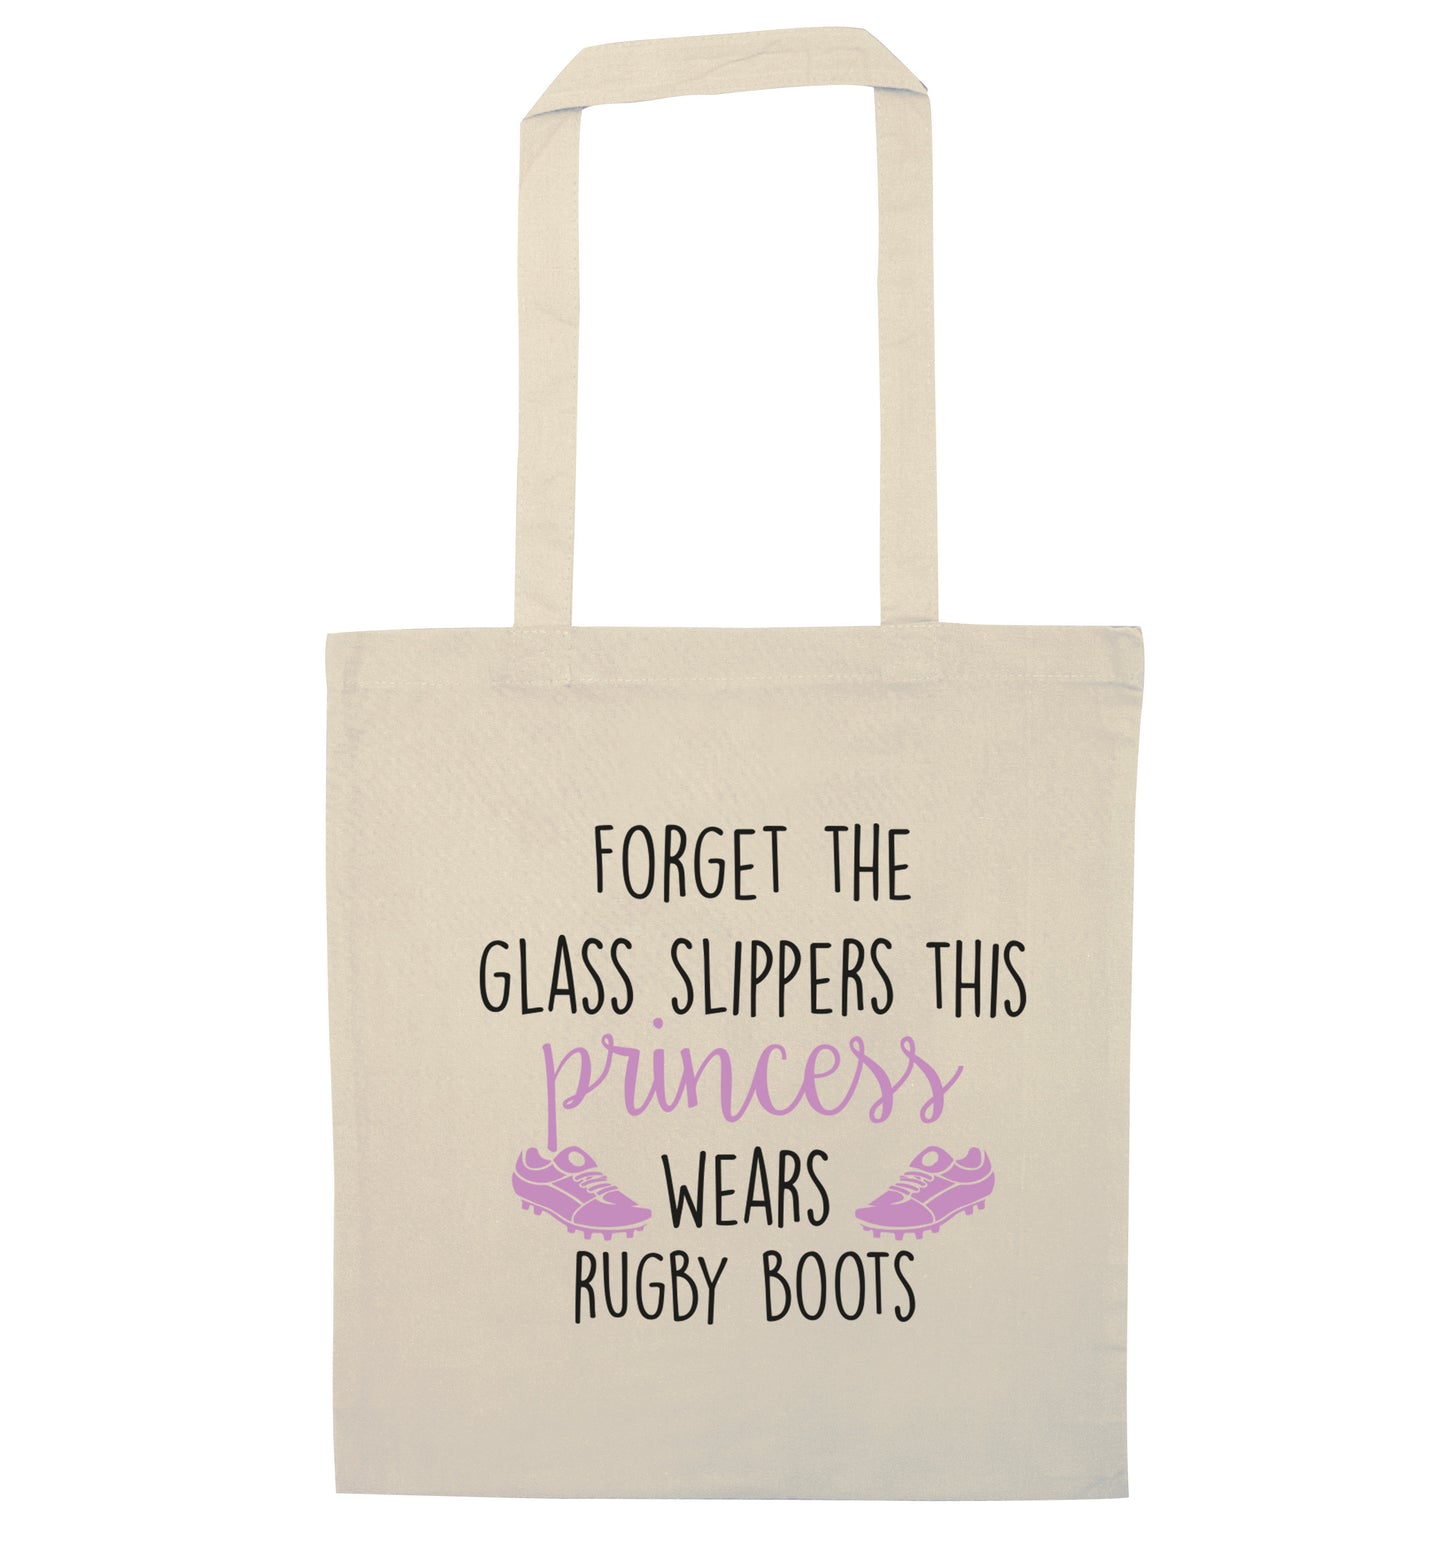 Forget the glass slippers this princess wears rugby boots natural tote bag